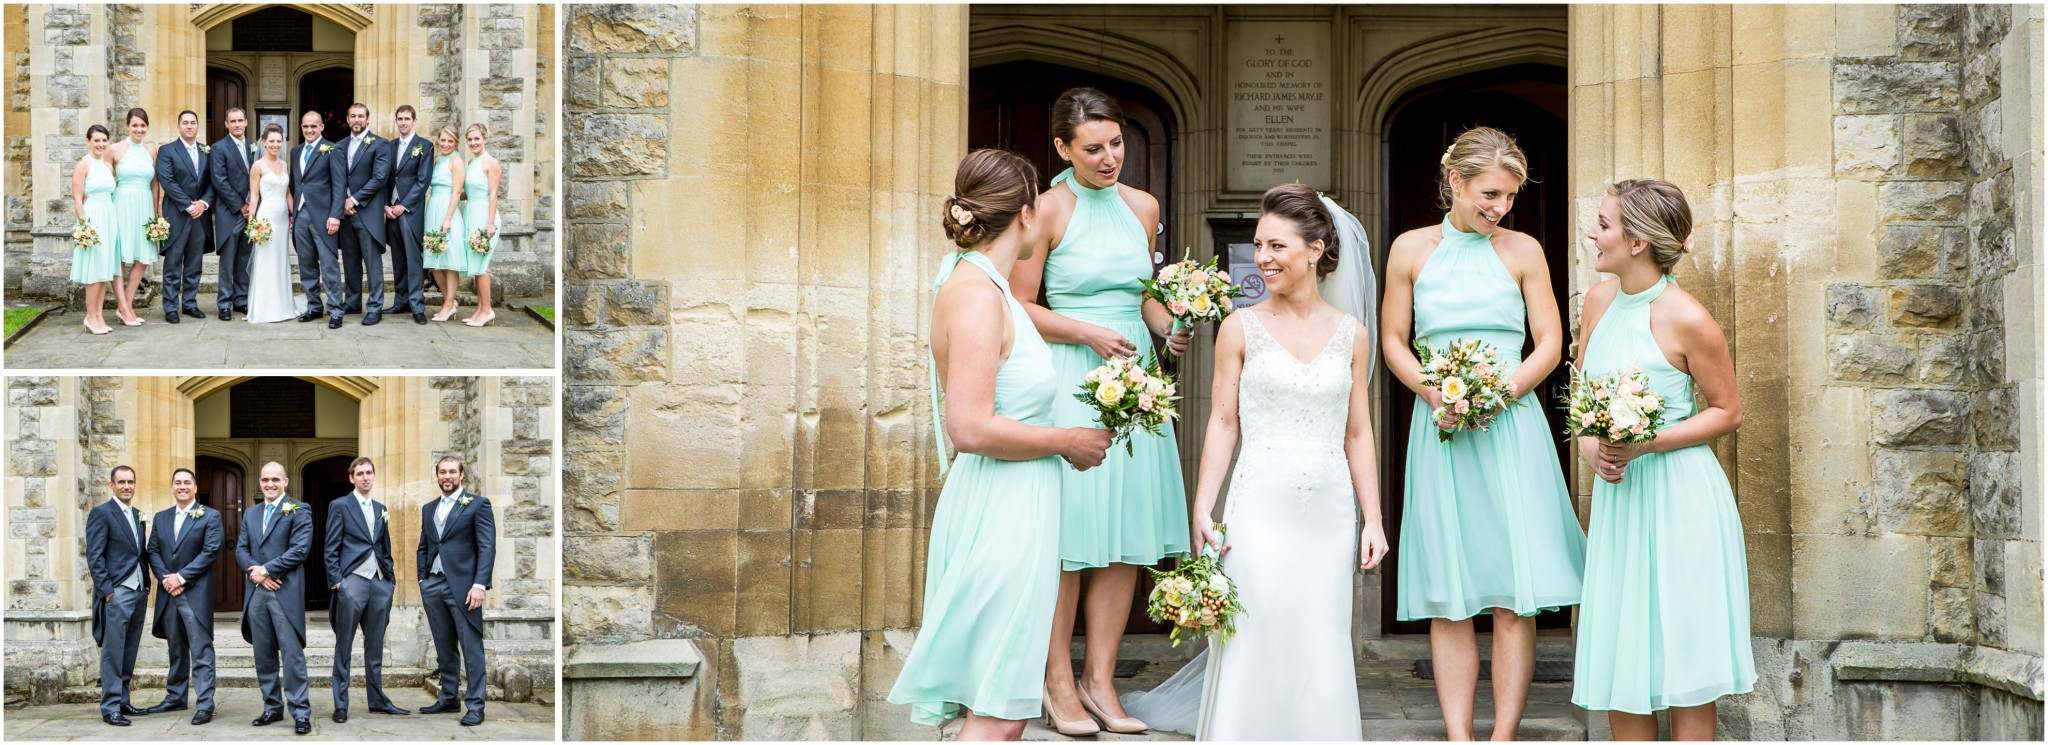 dulwich-picture-gallery-wedding-photography-037